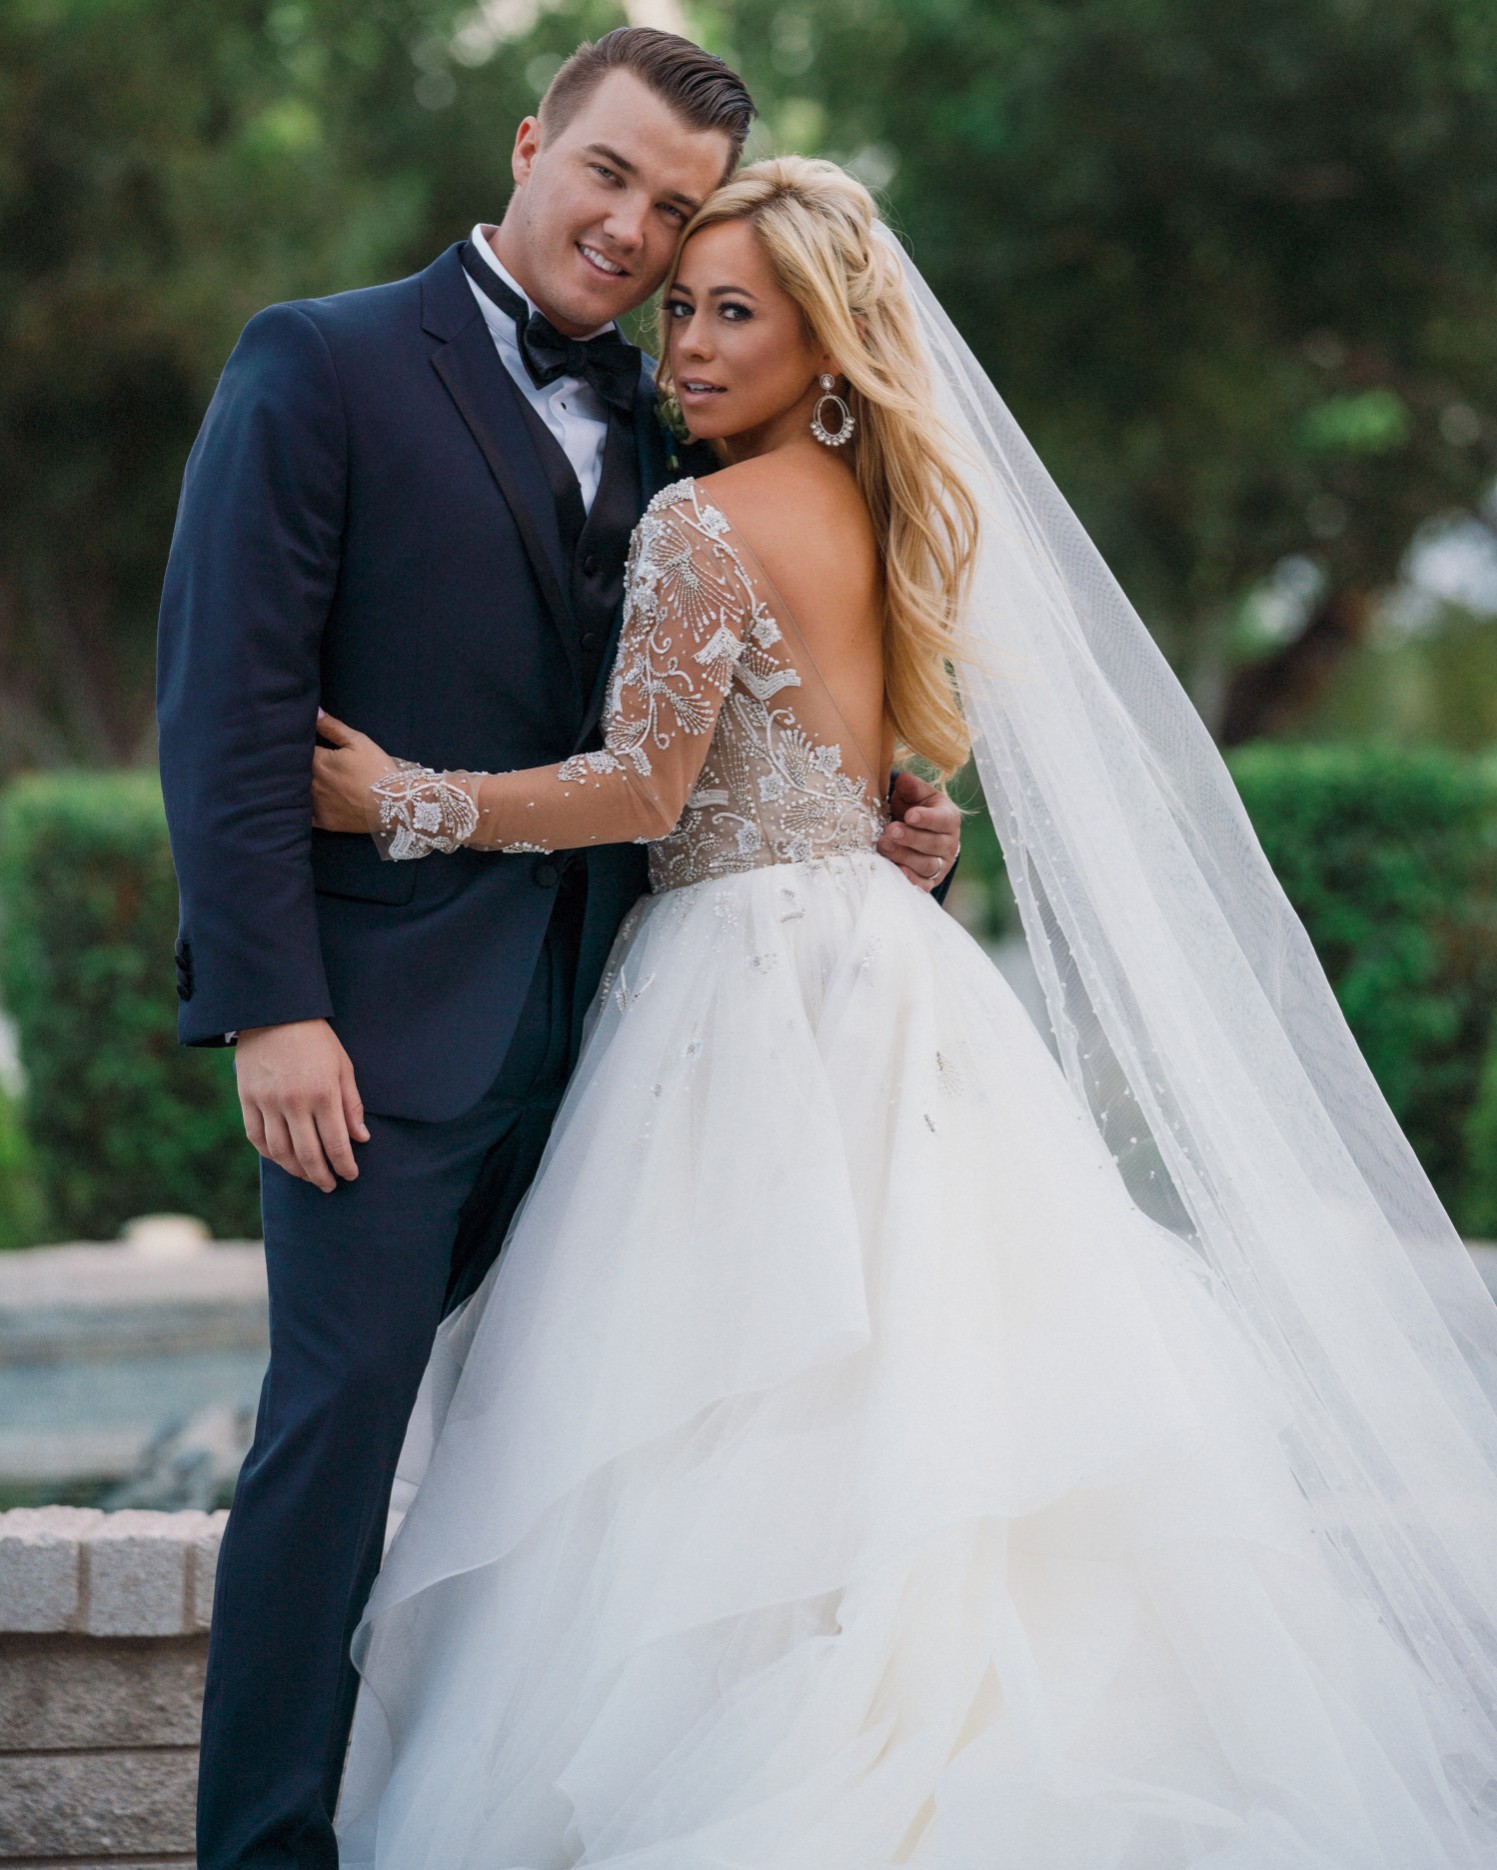 Exclusive Interview with Sabrina Bryan on Her Wedding, Married Life ...